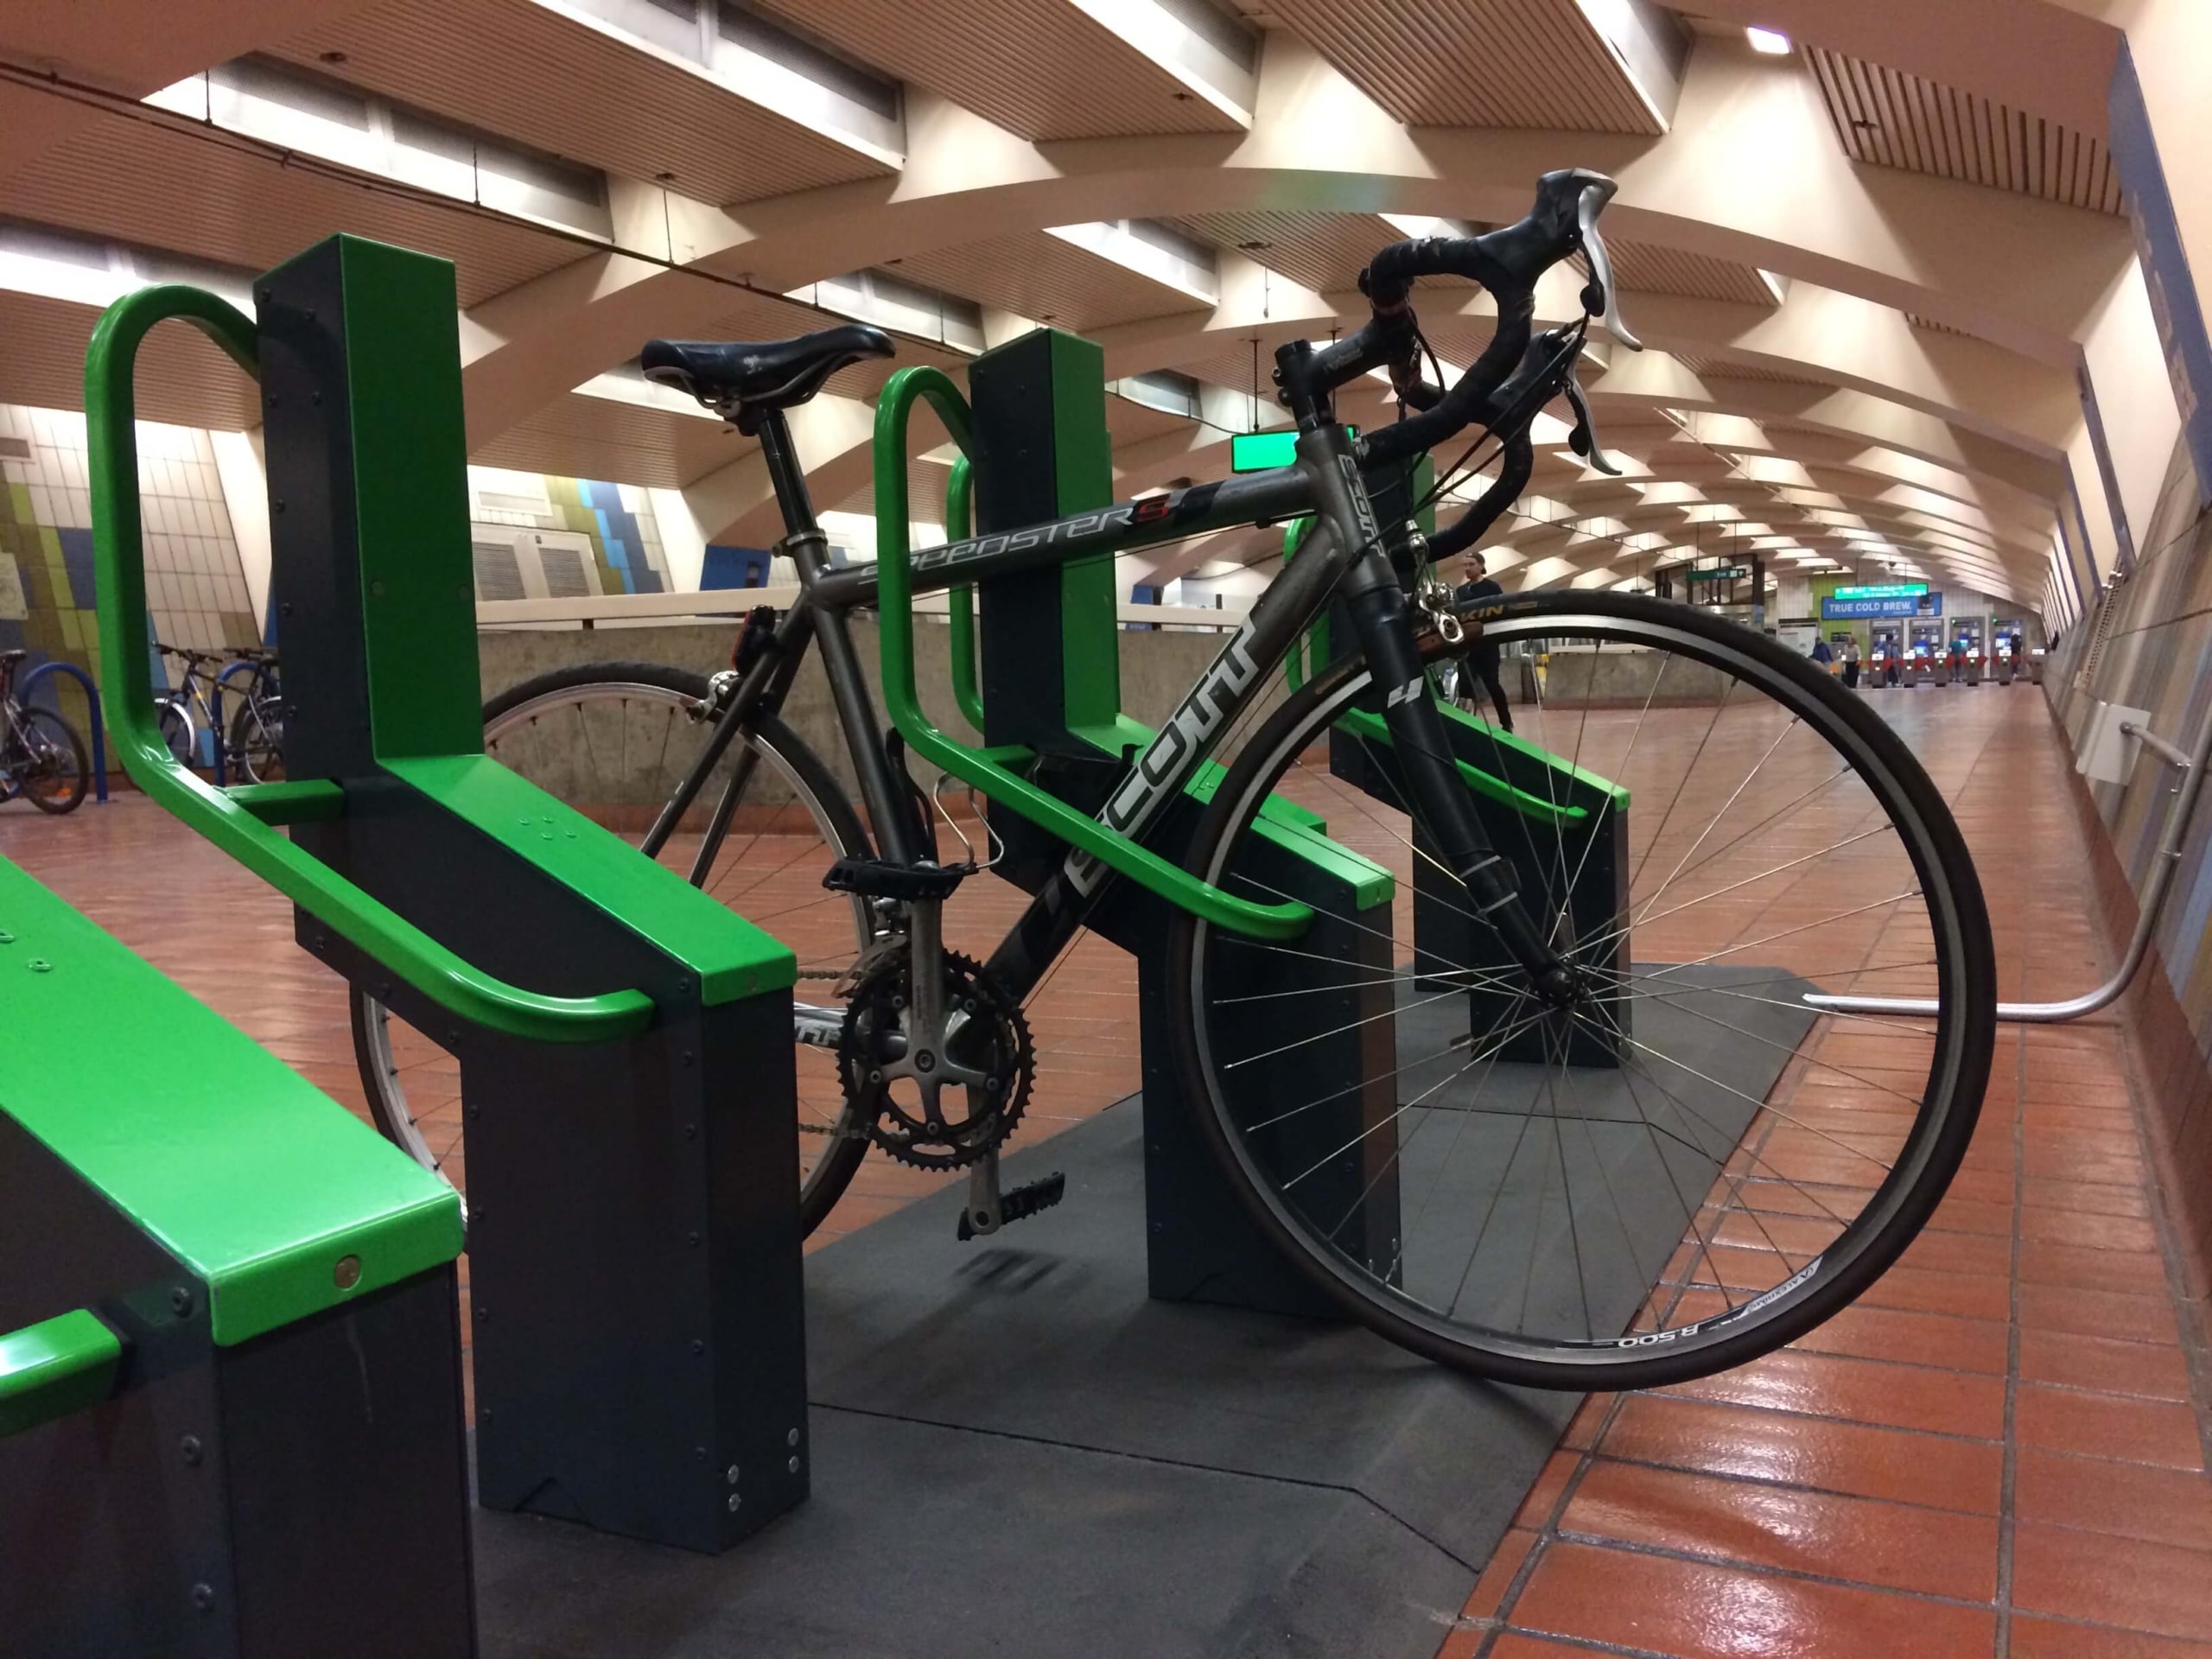 Personal and free bicycle parking now available in San Francisco